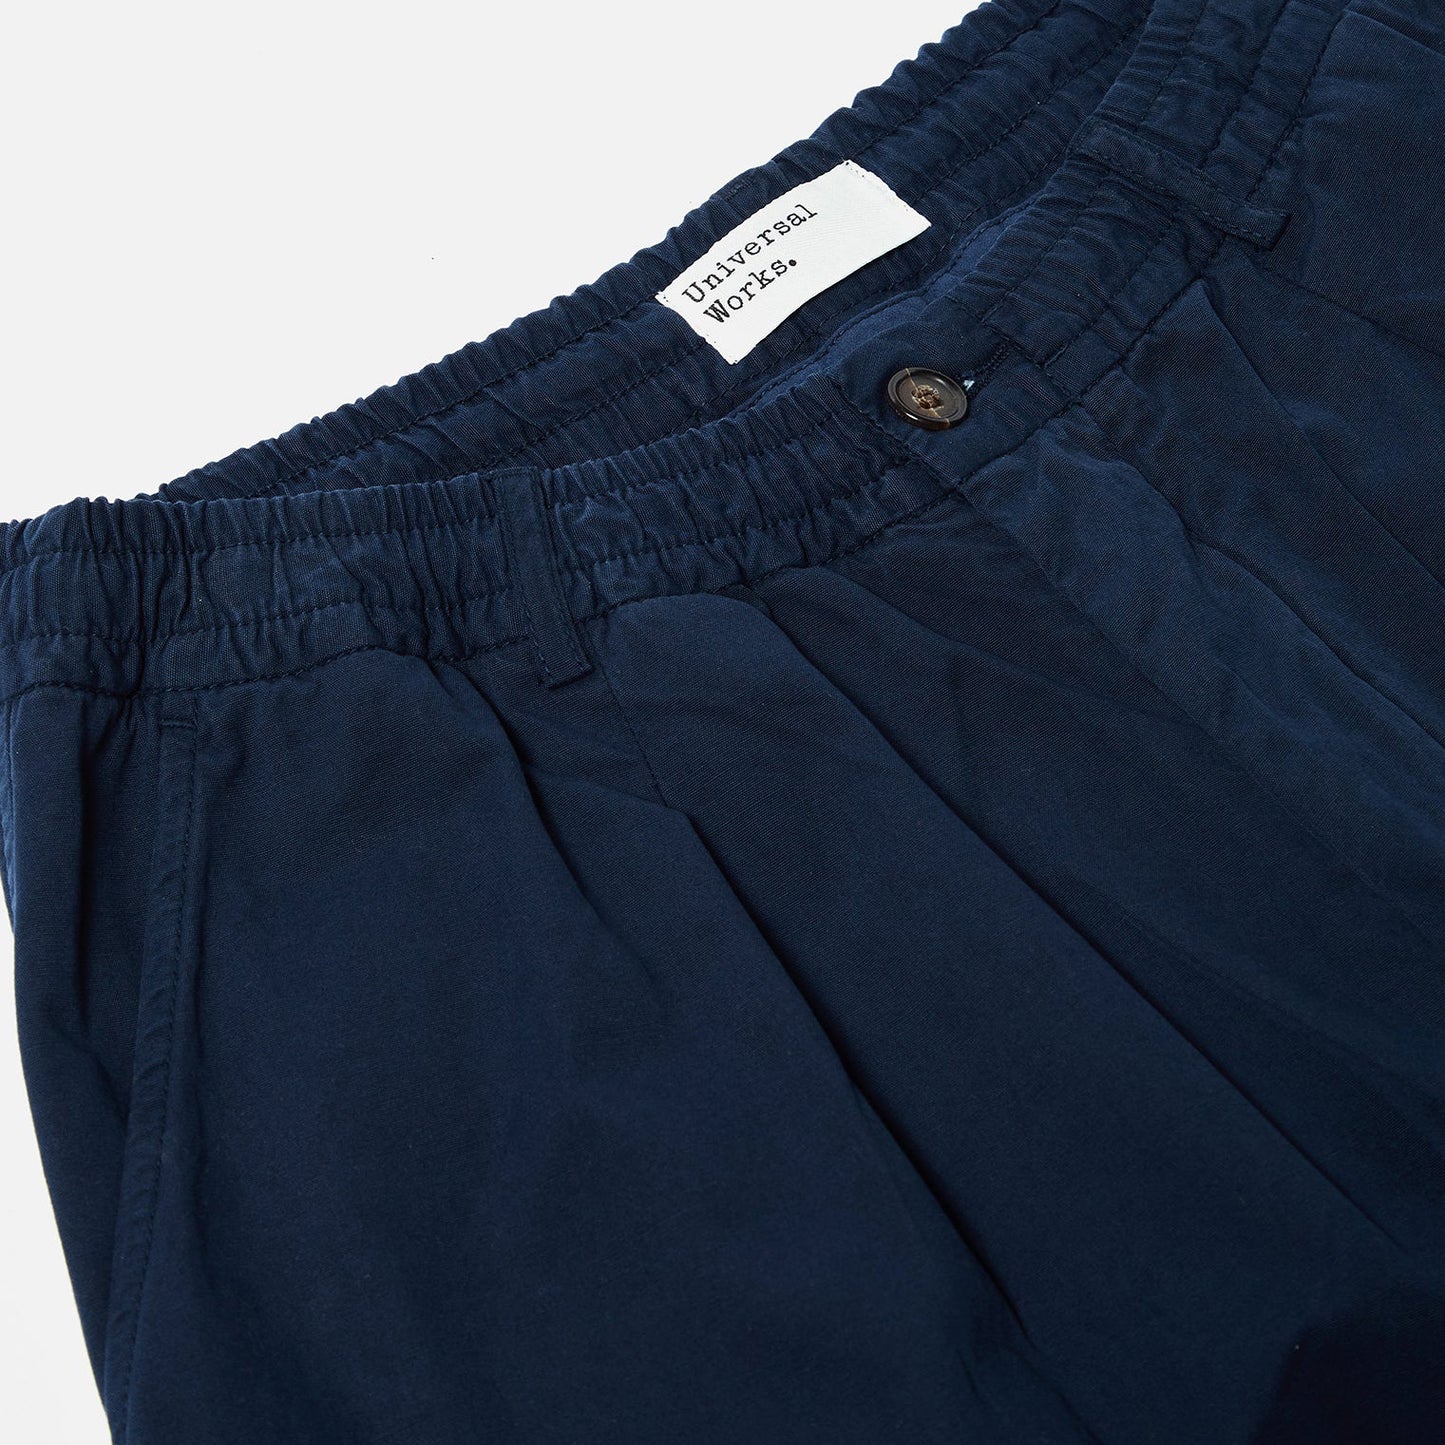 Universal Works Oxford Pant